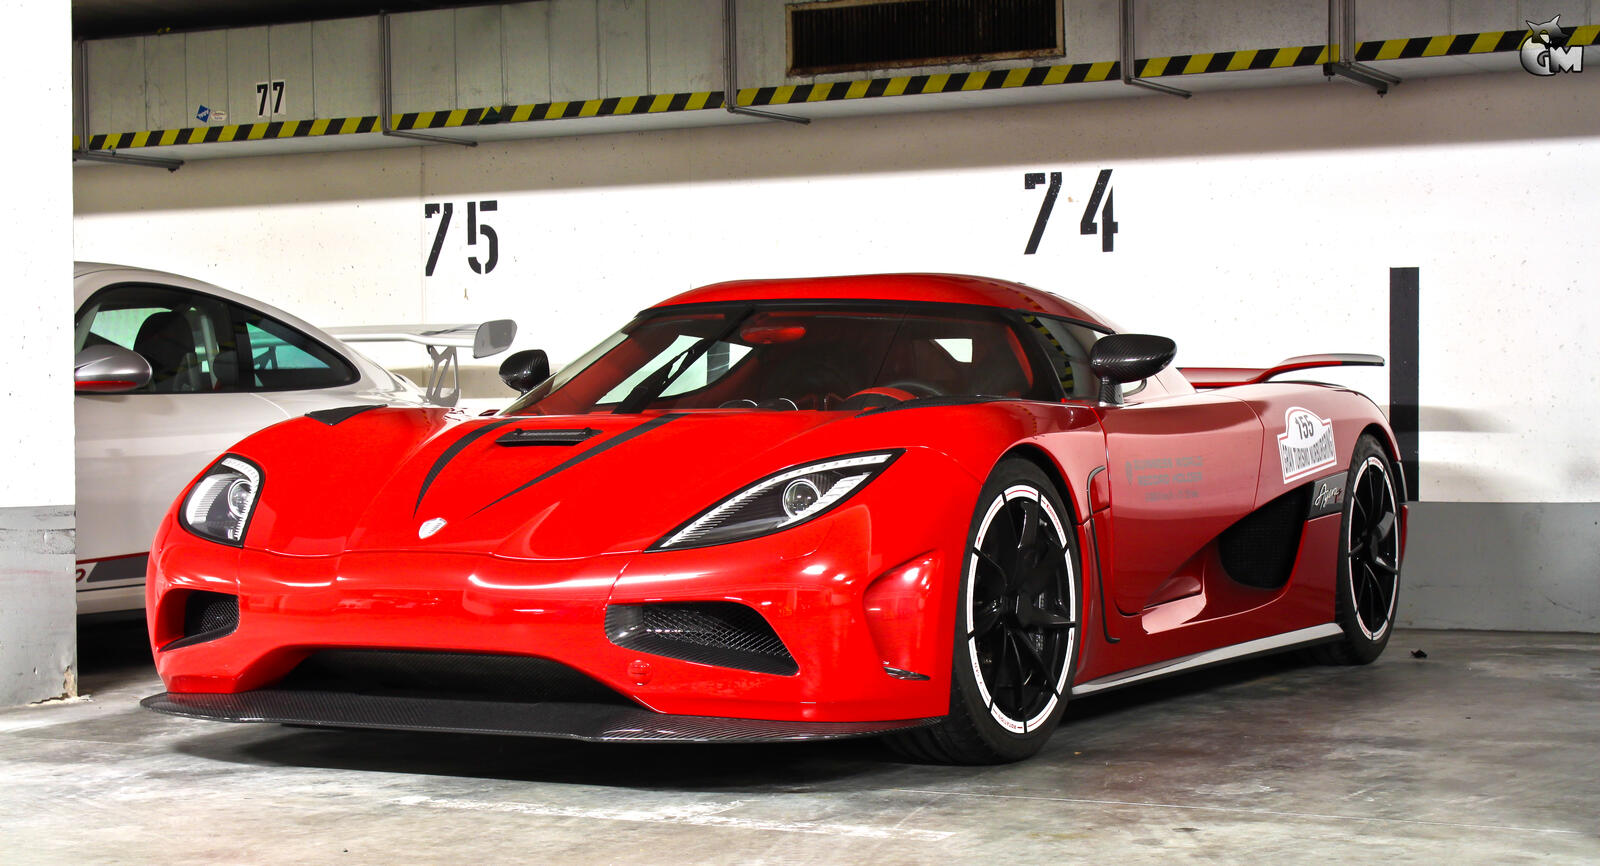 Free photo A car from the Swedish company Koenigsegg in red